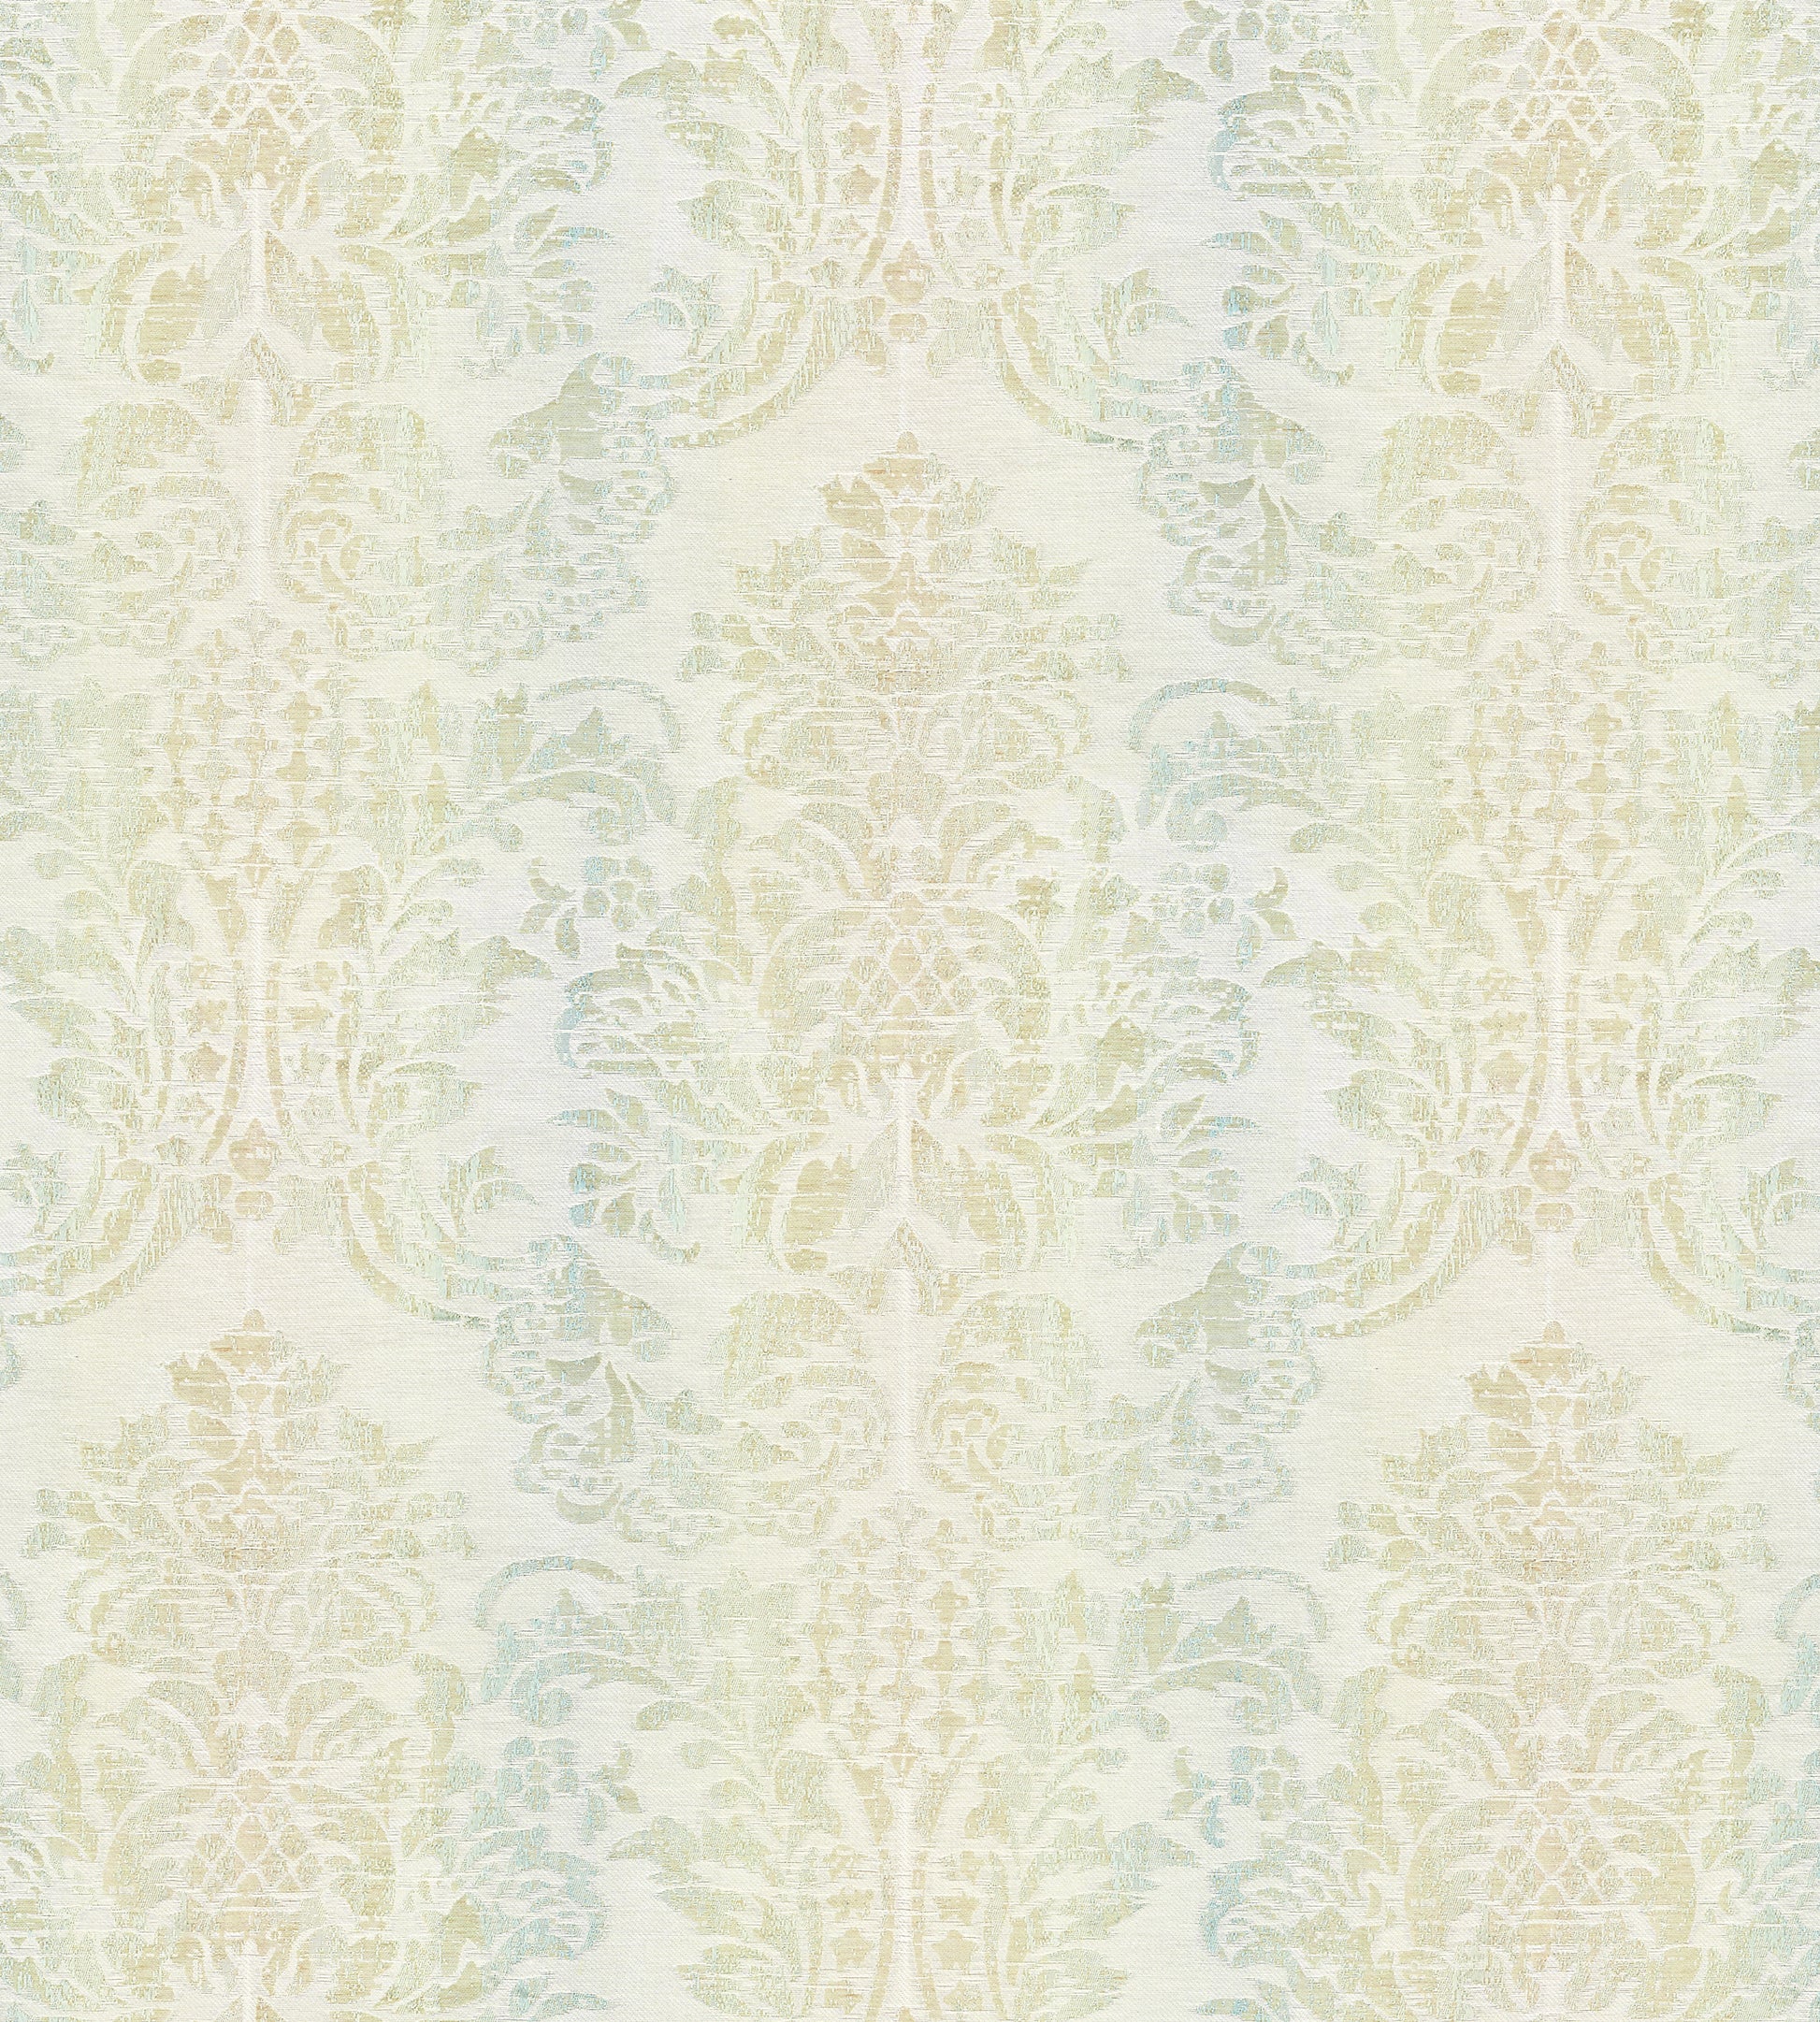 Purchase Scalamandre Fabric Pattern number SC 000227093, Sorrento Linen Damask Mineral 3